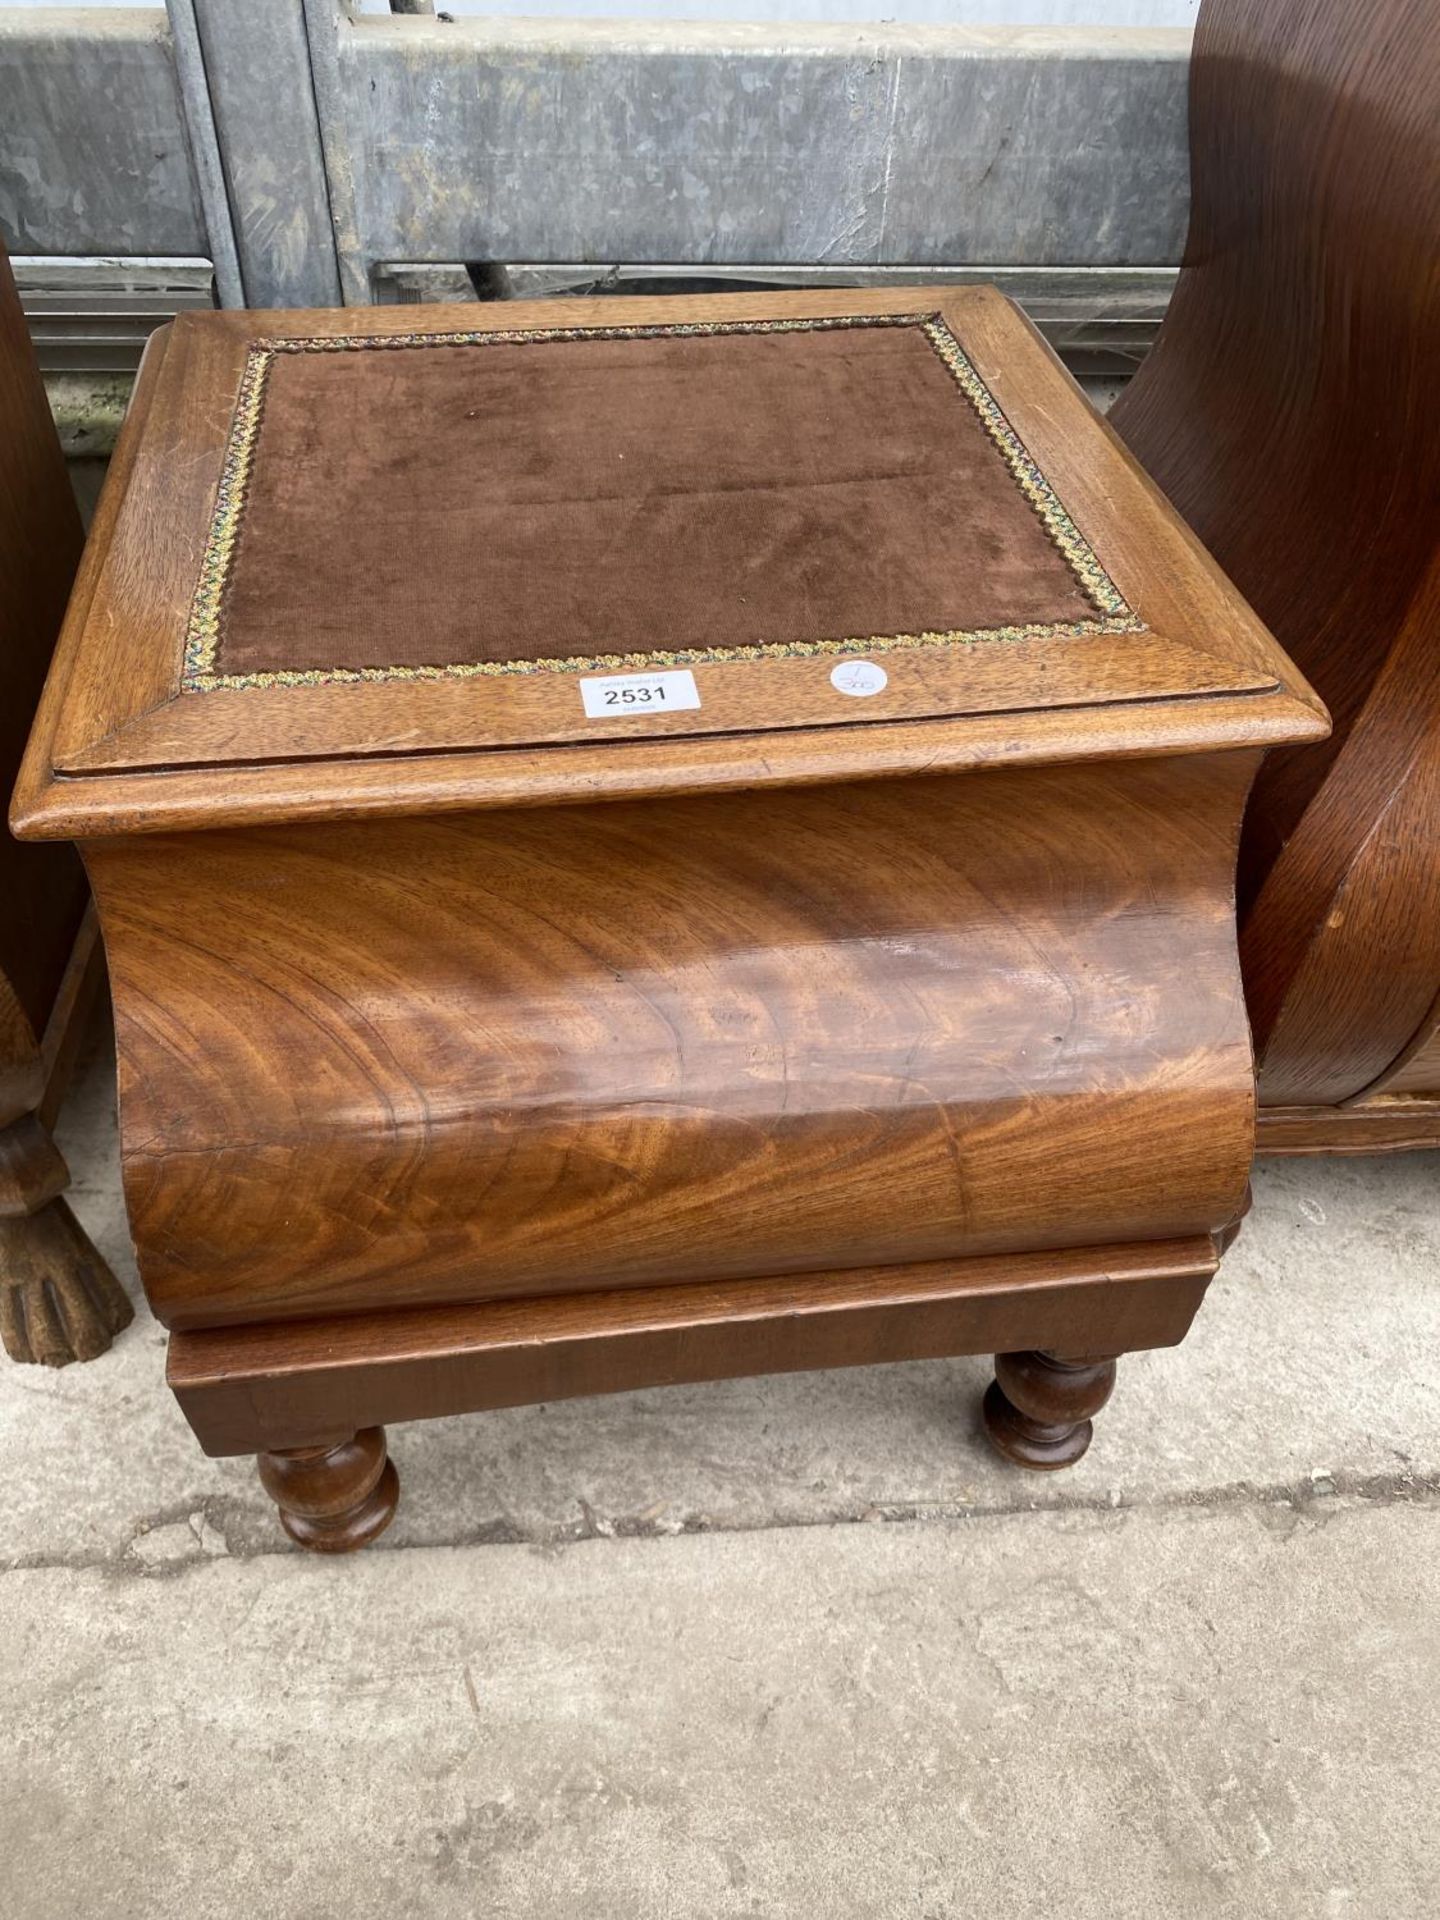 A VICTORIAN MAHOGANY COMMODE WITH CHAMBER POT